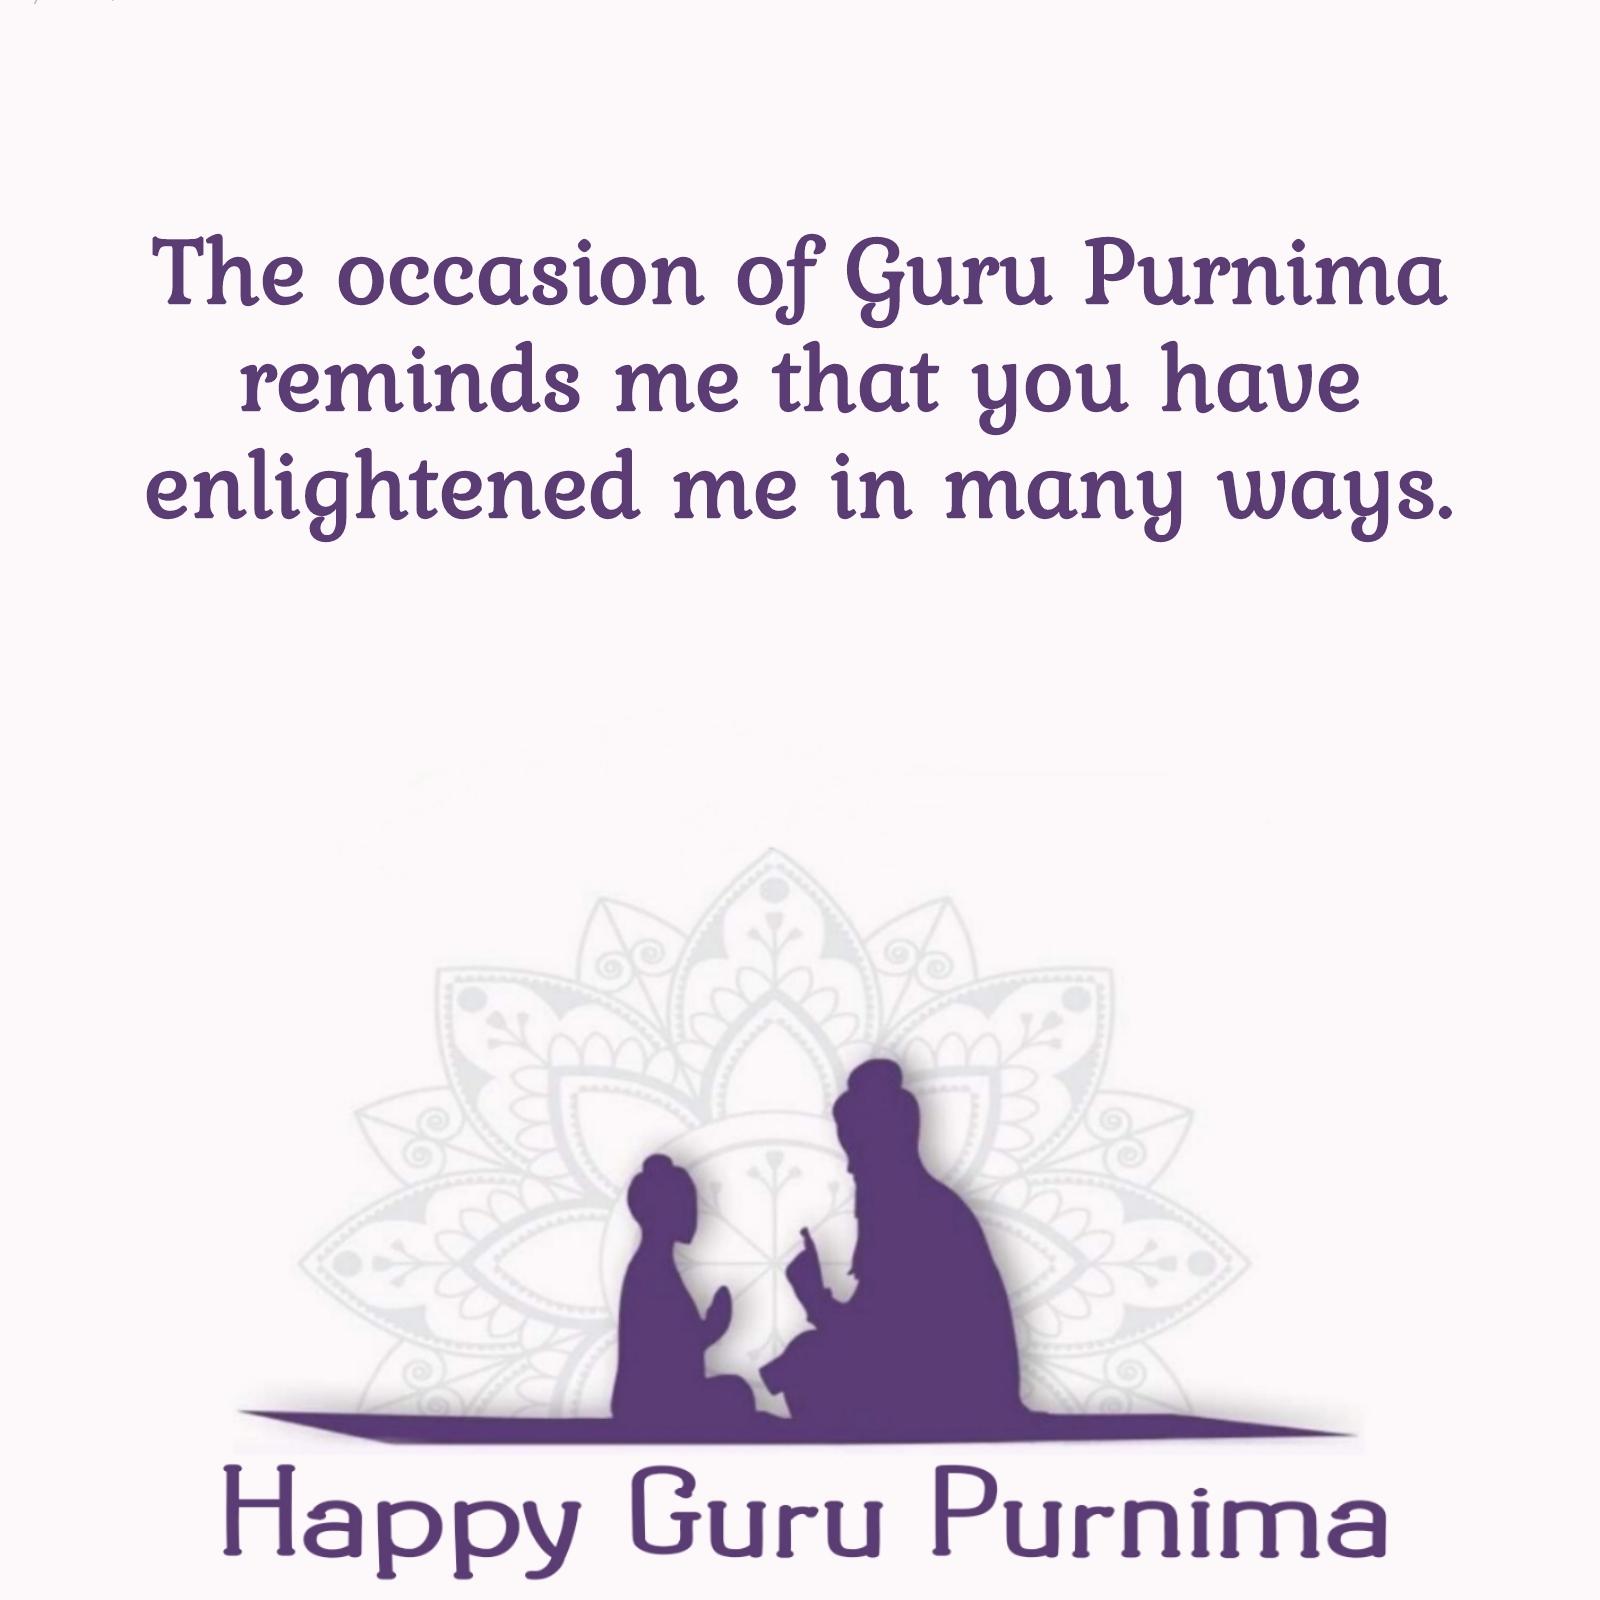 The occasion of Guru Purnima reminds me that you have enlightened me